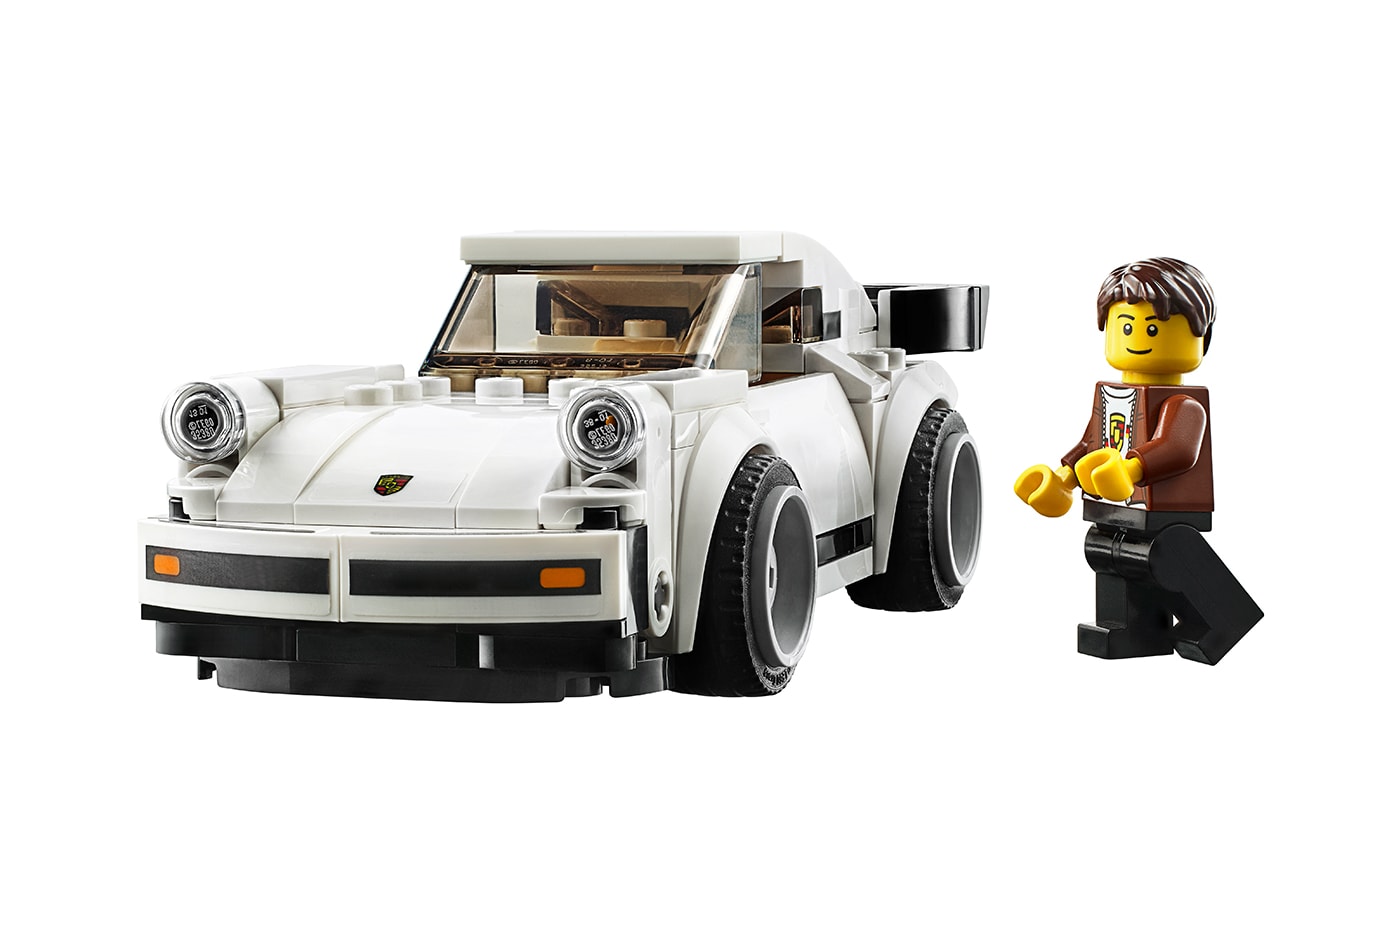 LEGO 1974 Porsche 911 Turbo 3 0 Release Info racing cars collectible toys bricks motorsport hobby building models